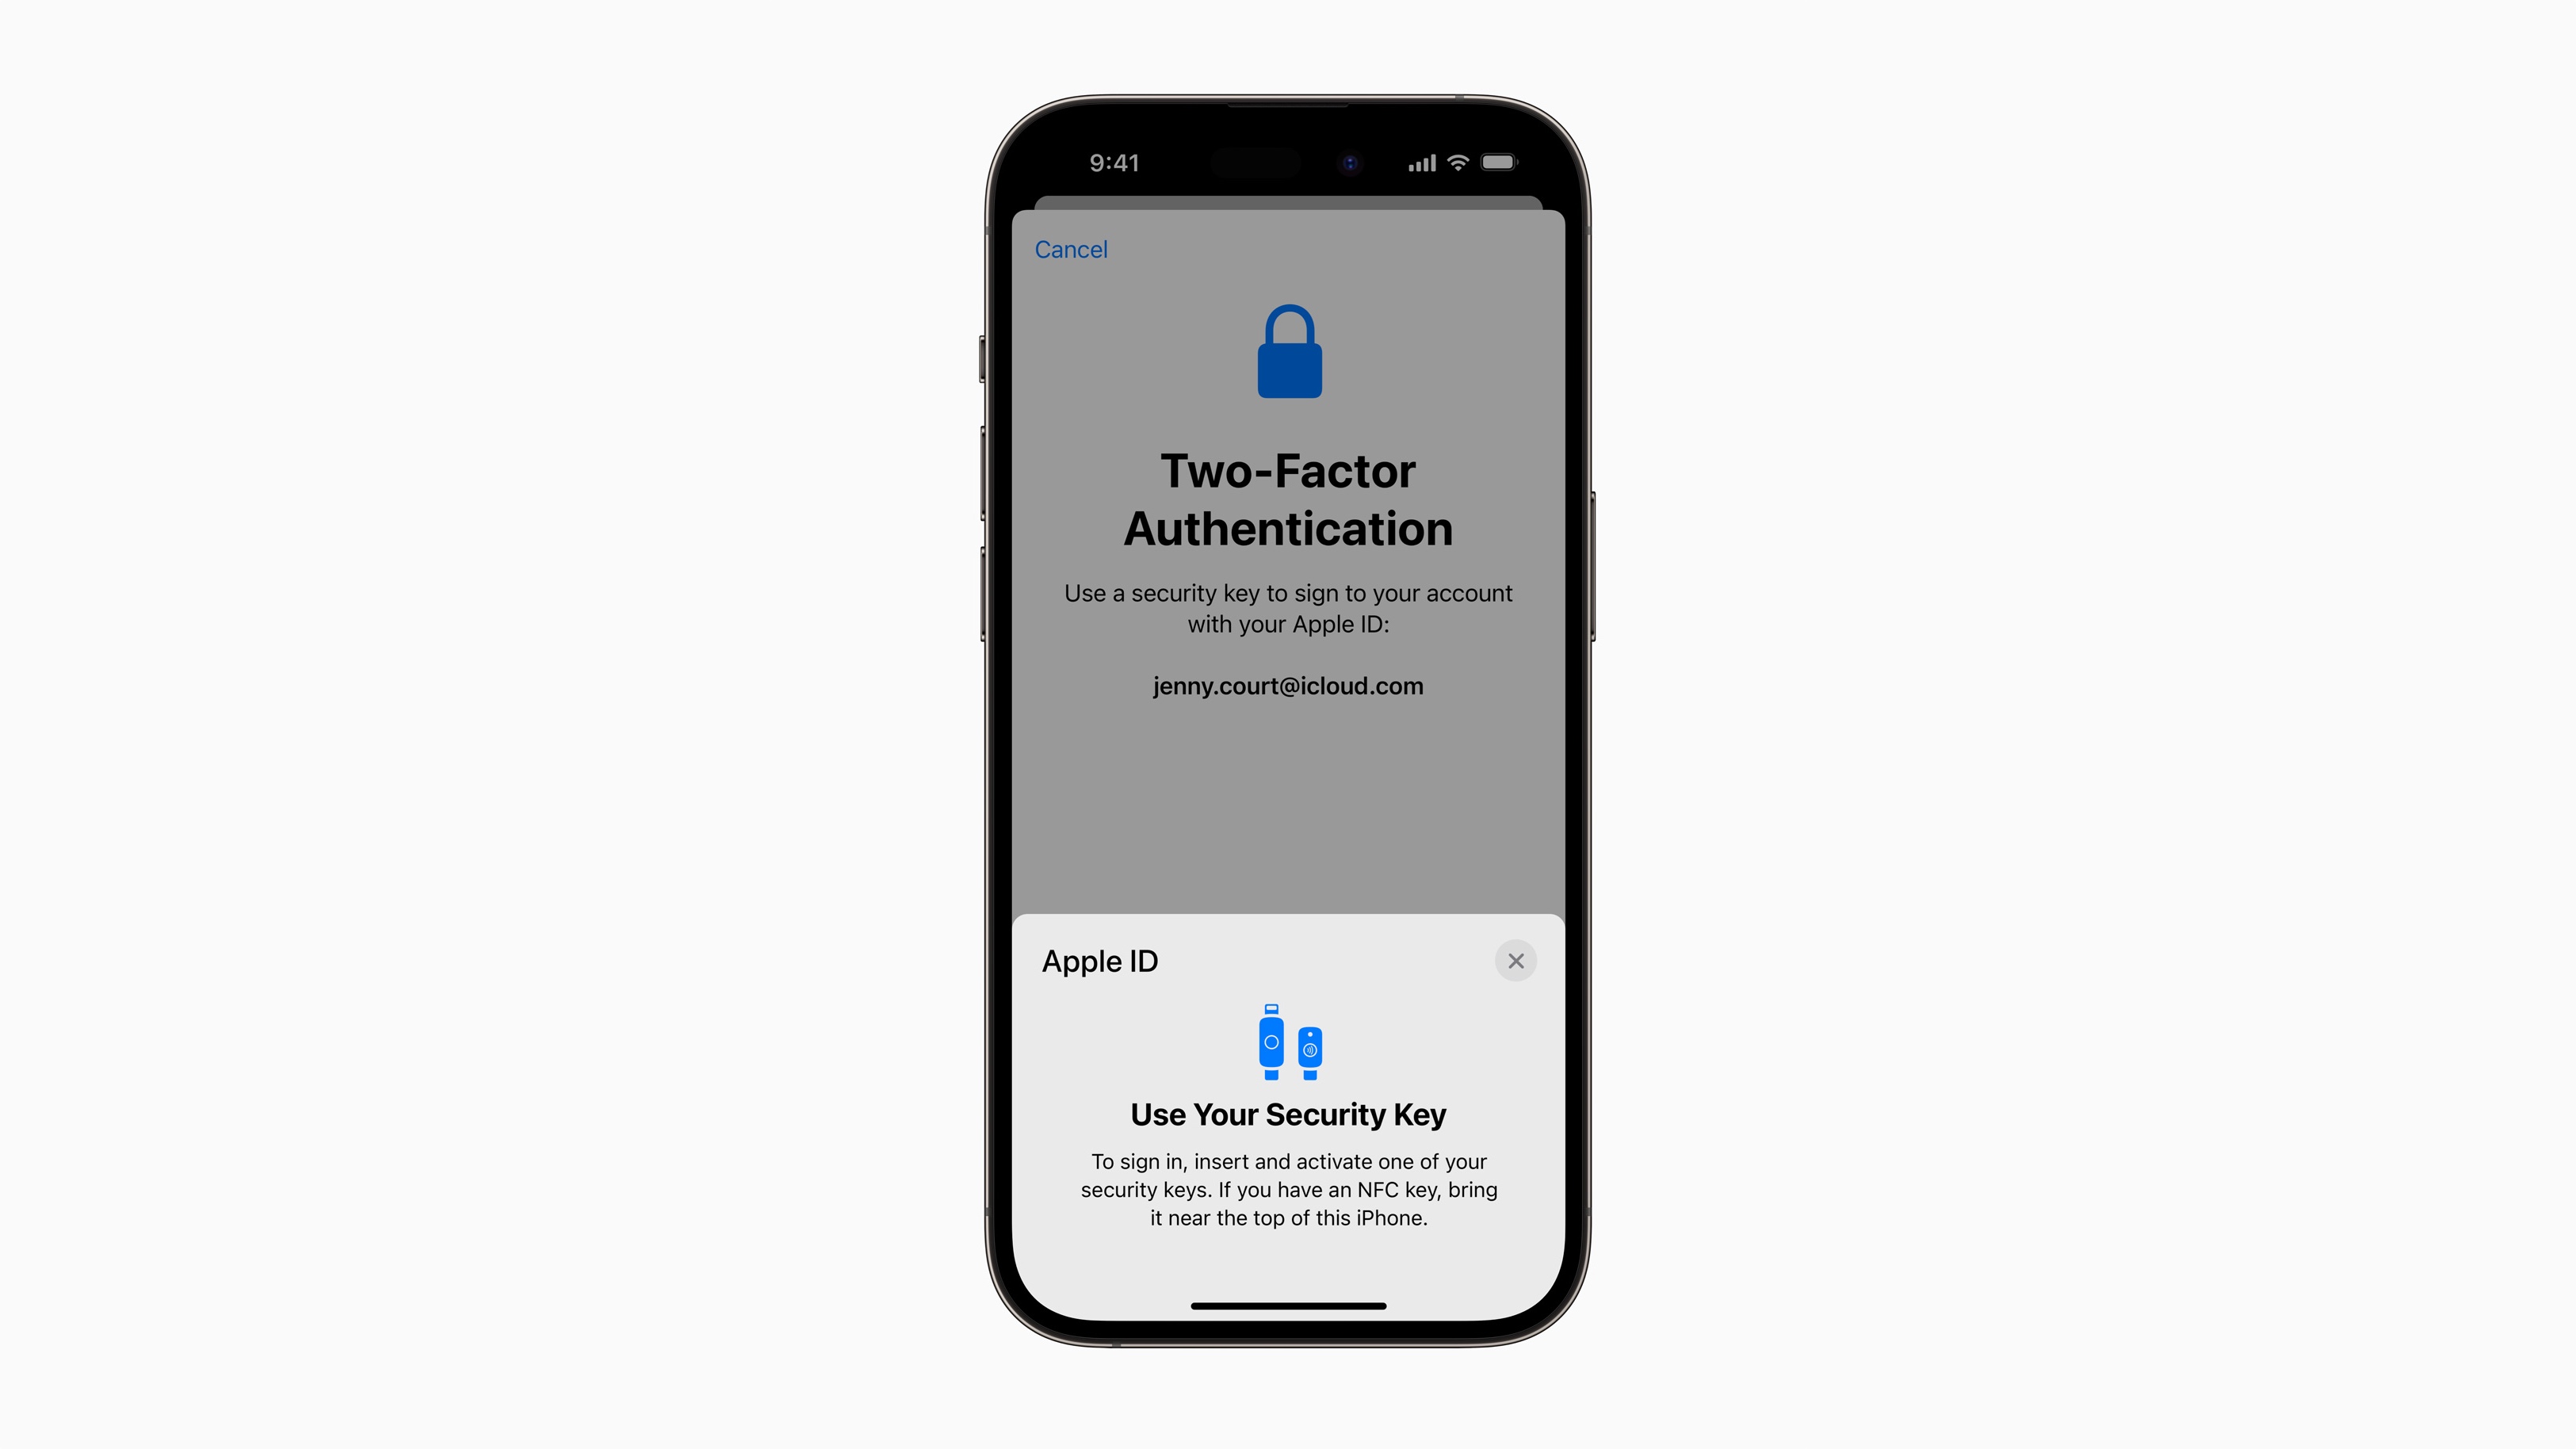 Security keys for Apple ID give users the option to request a physical security key to sign in to their Apple ID account.